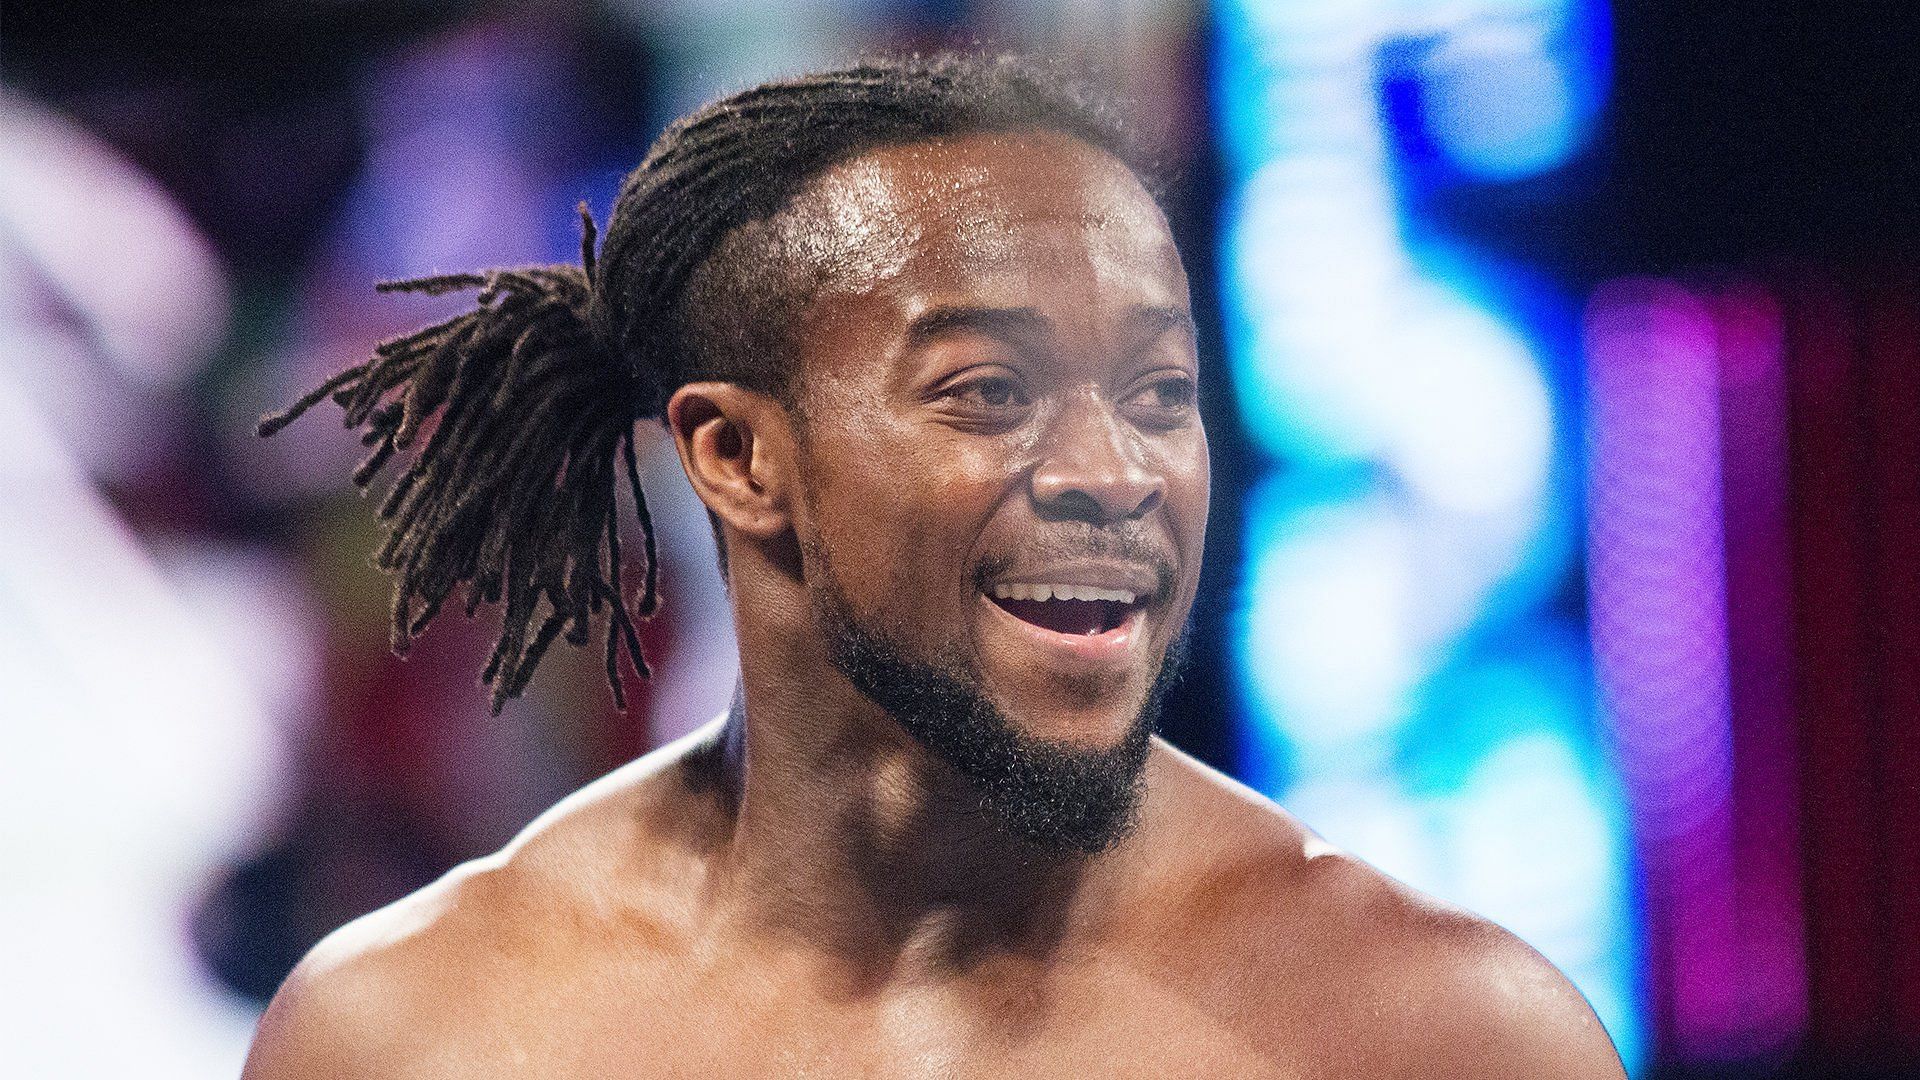 Kofi Kingston is all smiles in the ring on WWE RAW